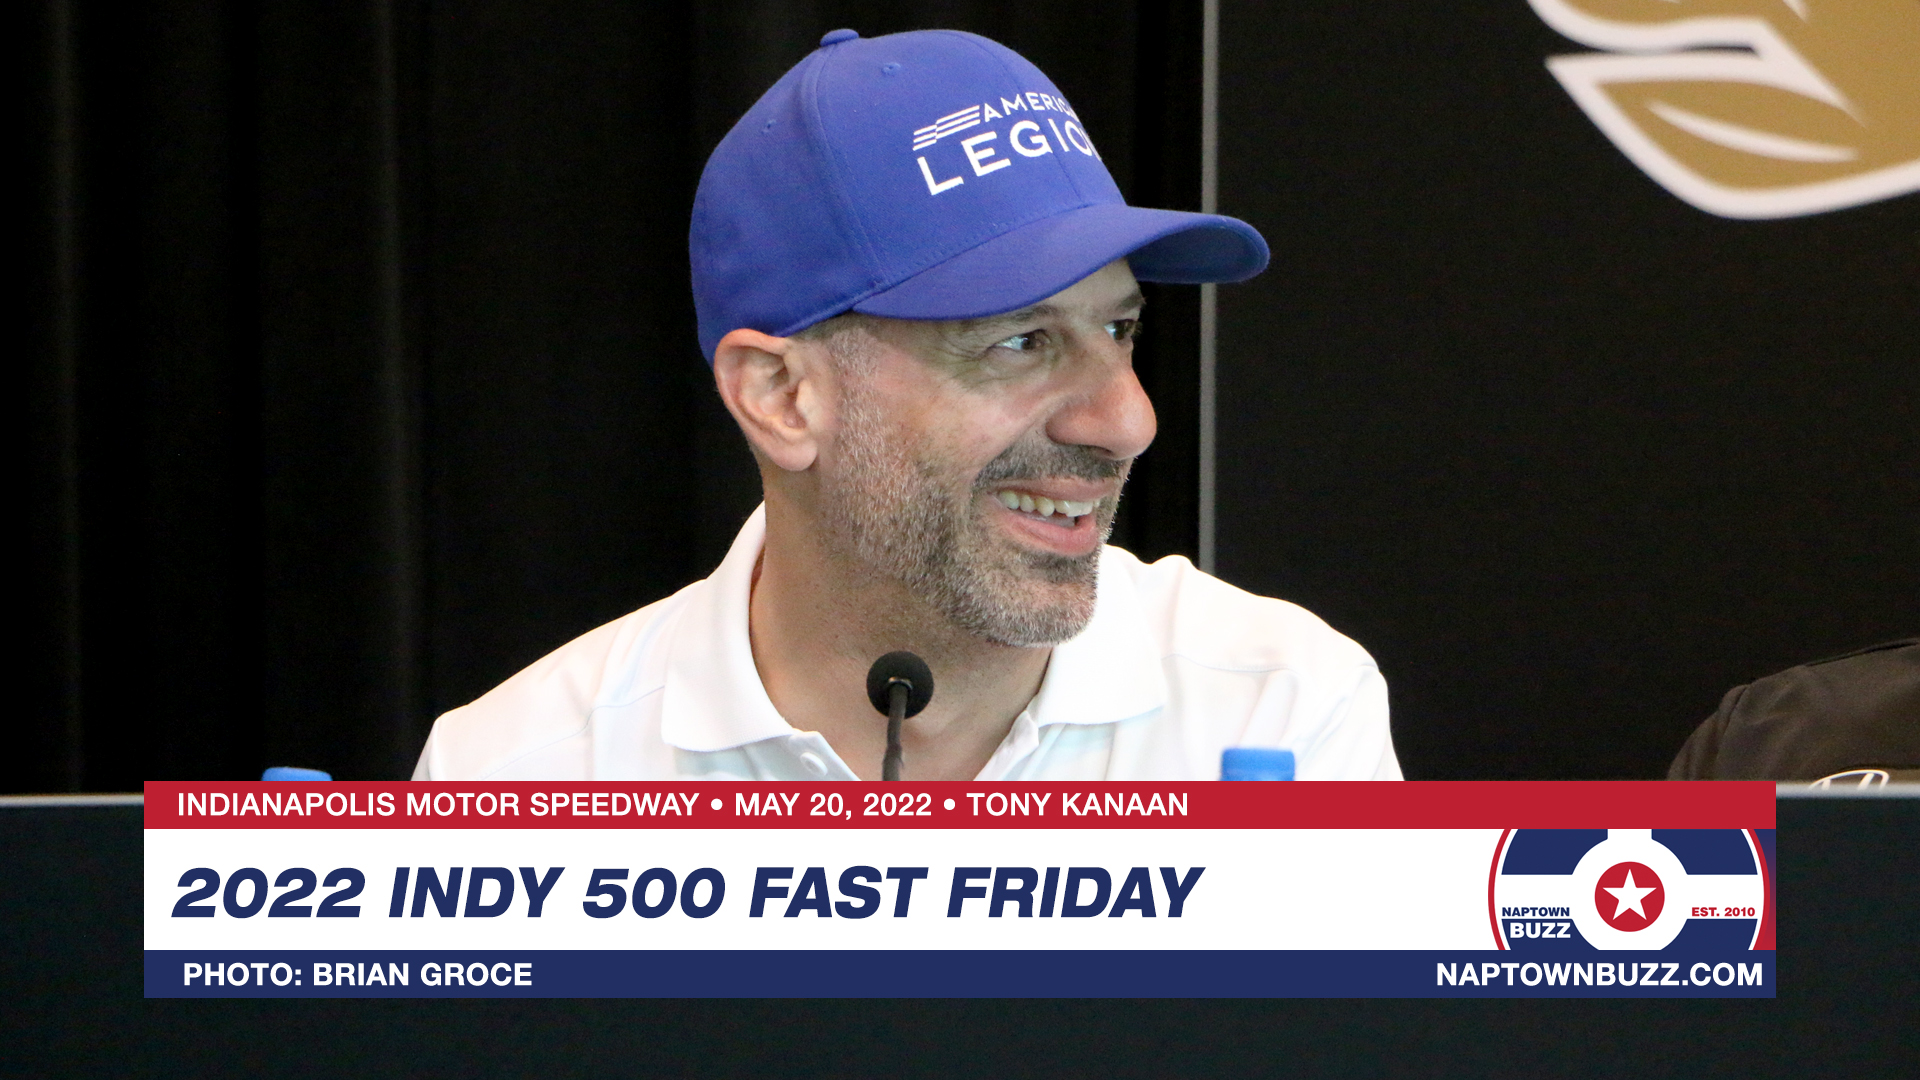 Tony Kanaan on Indy 500 Fast Friday Practice at Indianapolis Motor Speedway on May 20, 2022